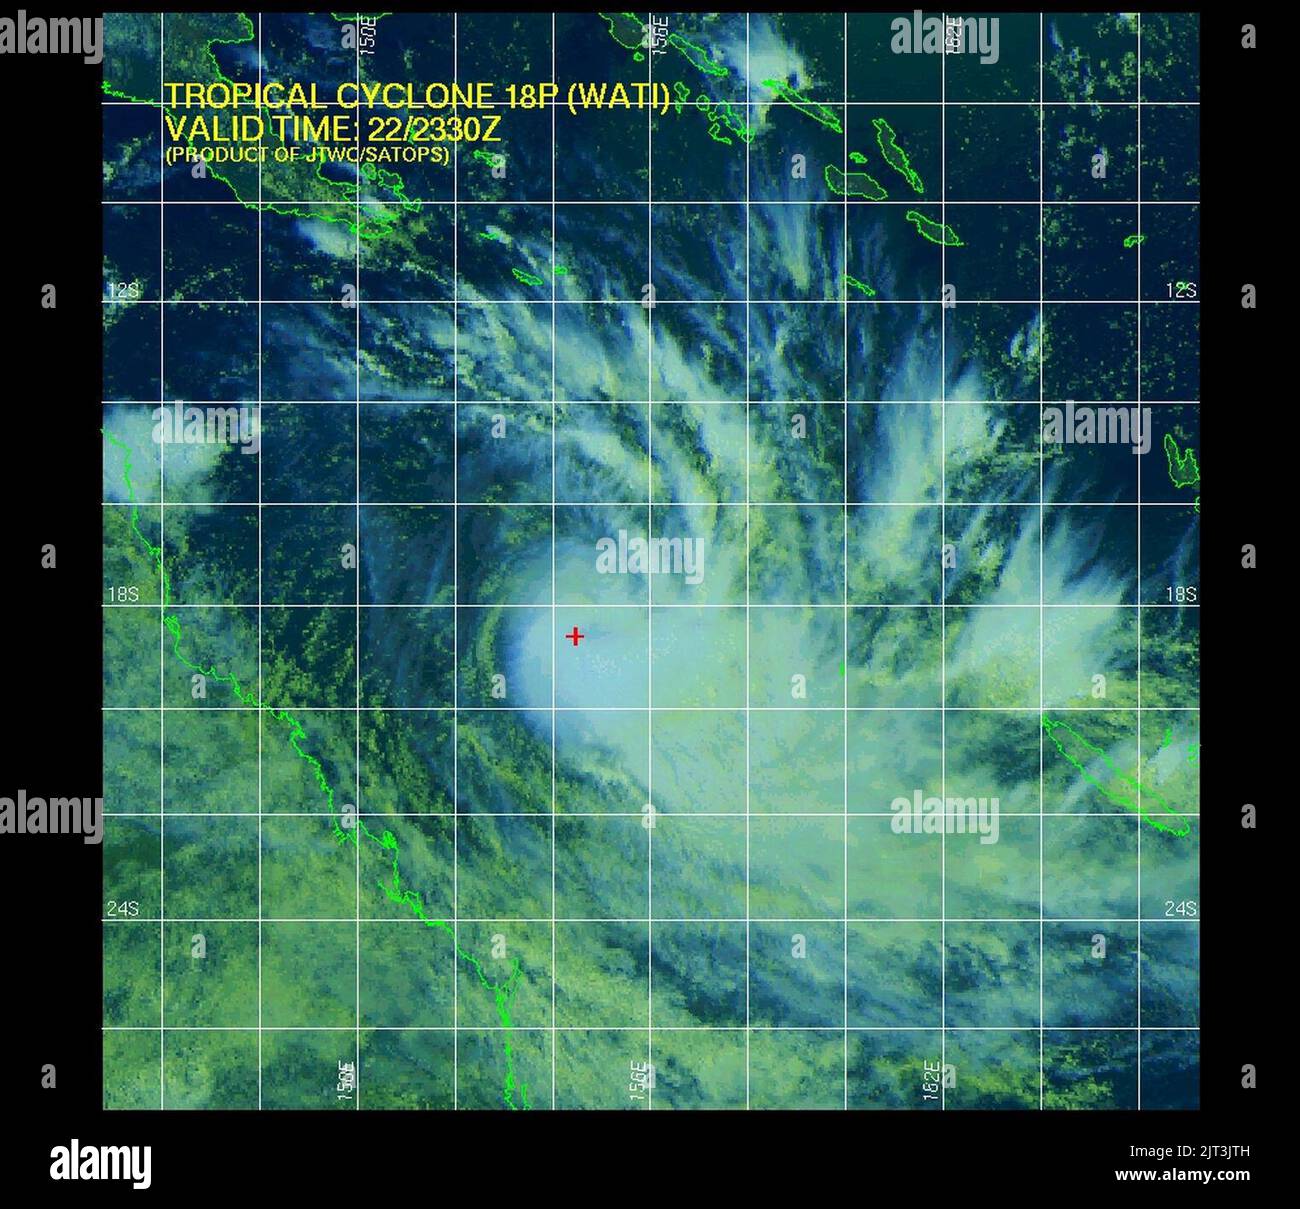 Cyclone tropical 18P (Wati) 2006-03-22 2330Z. Banque D'Images